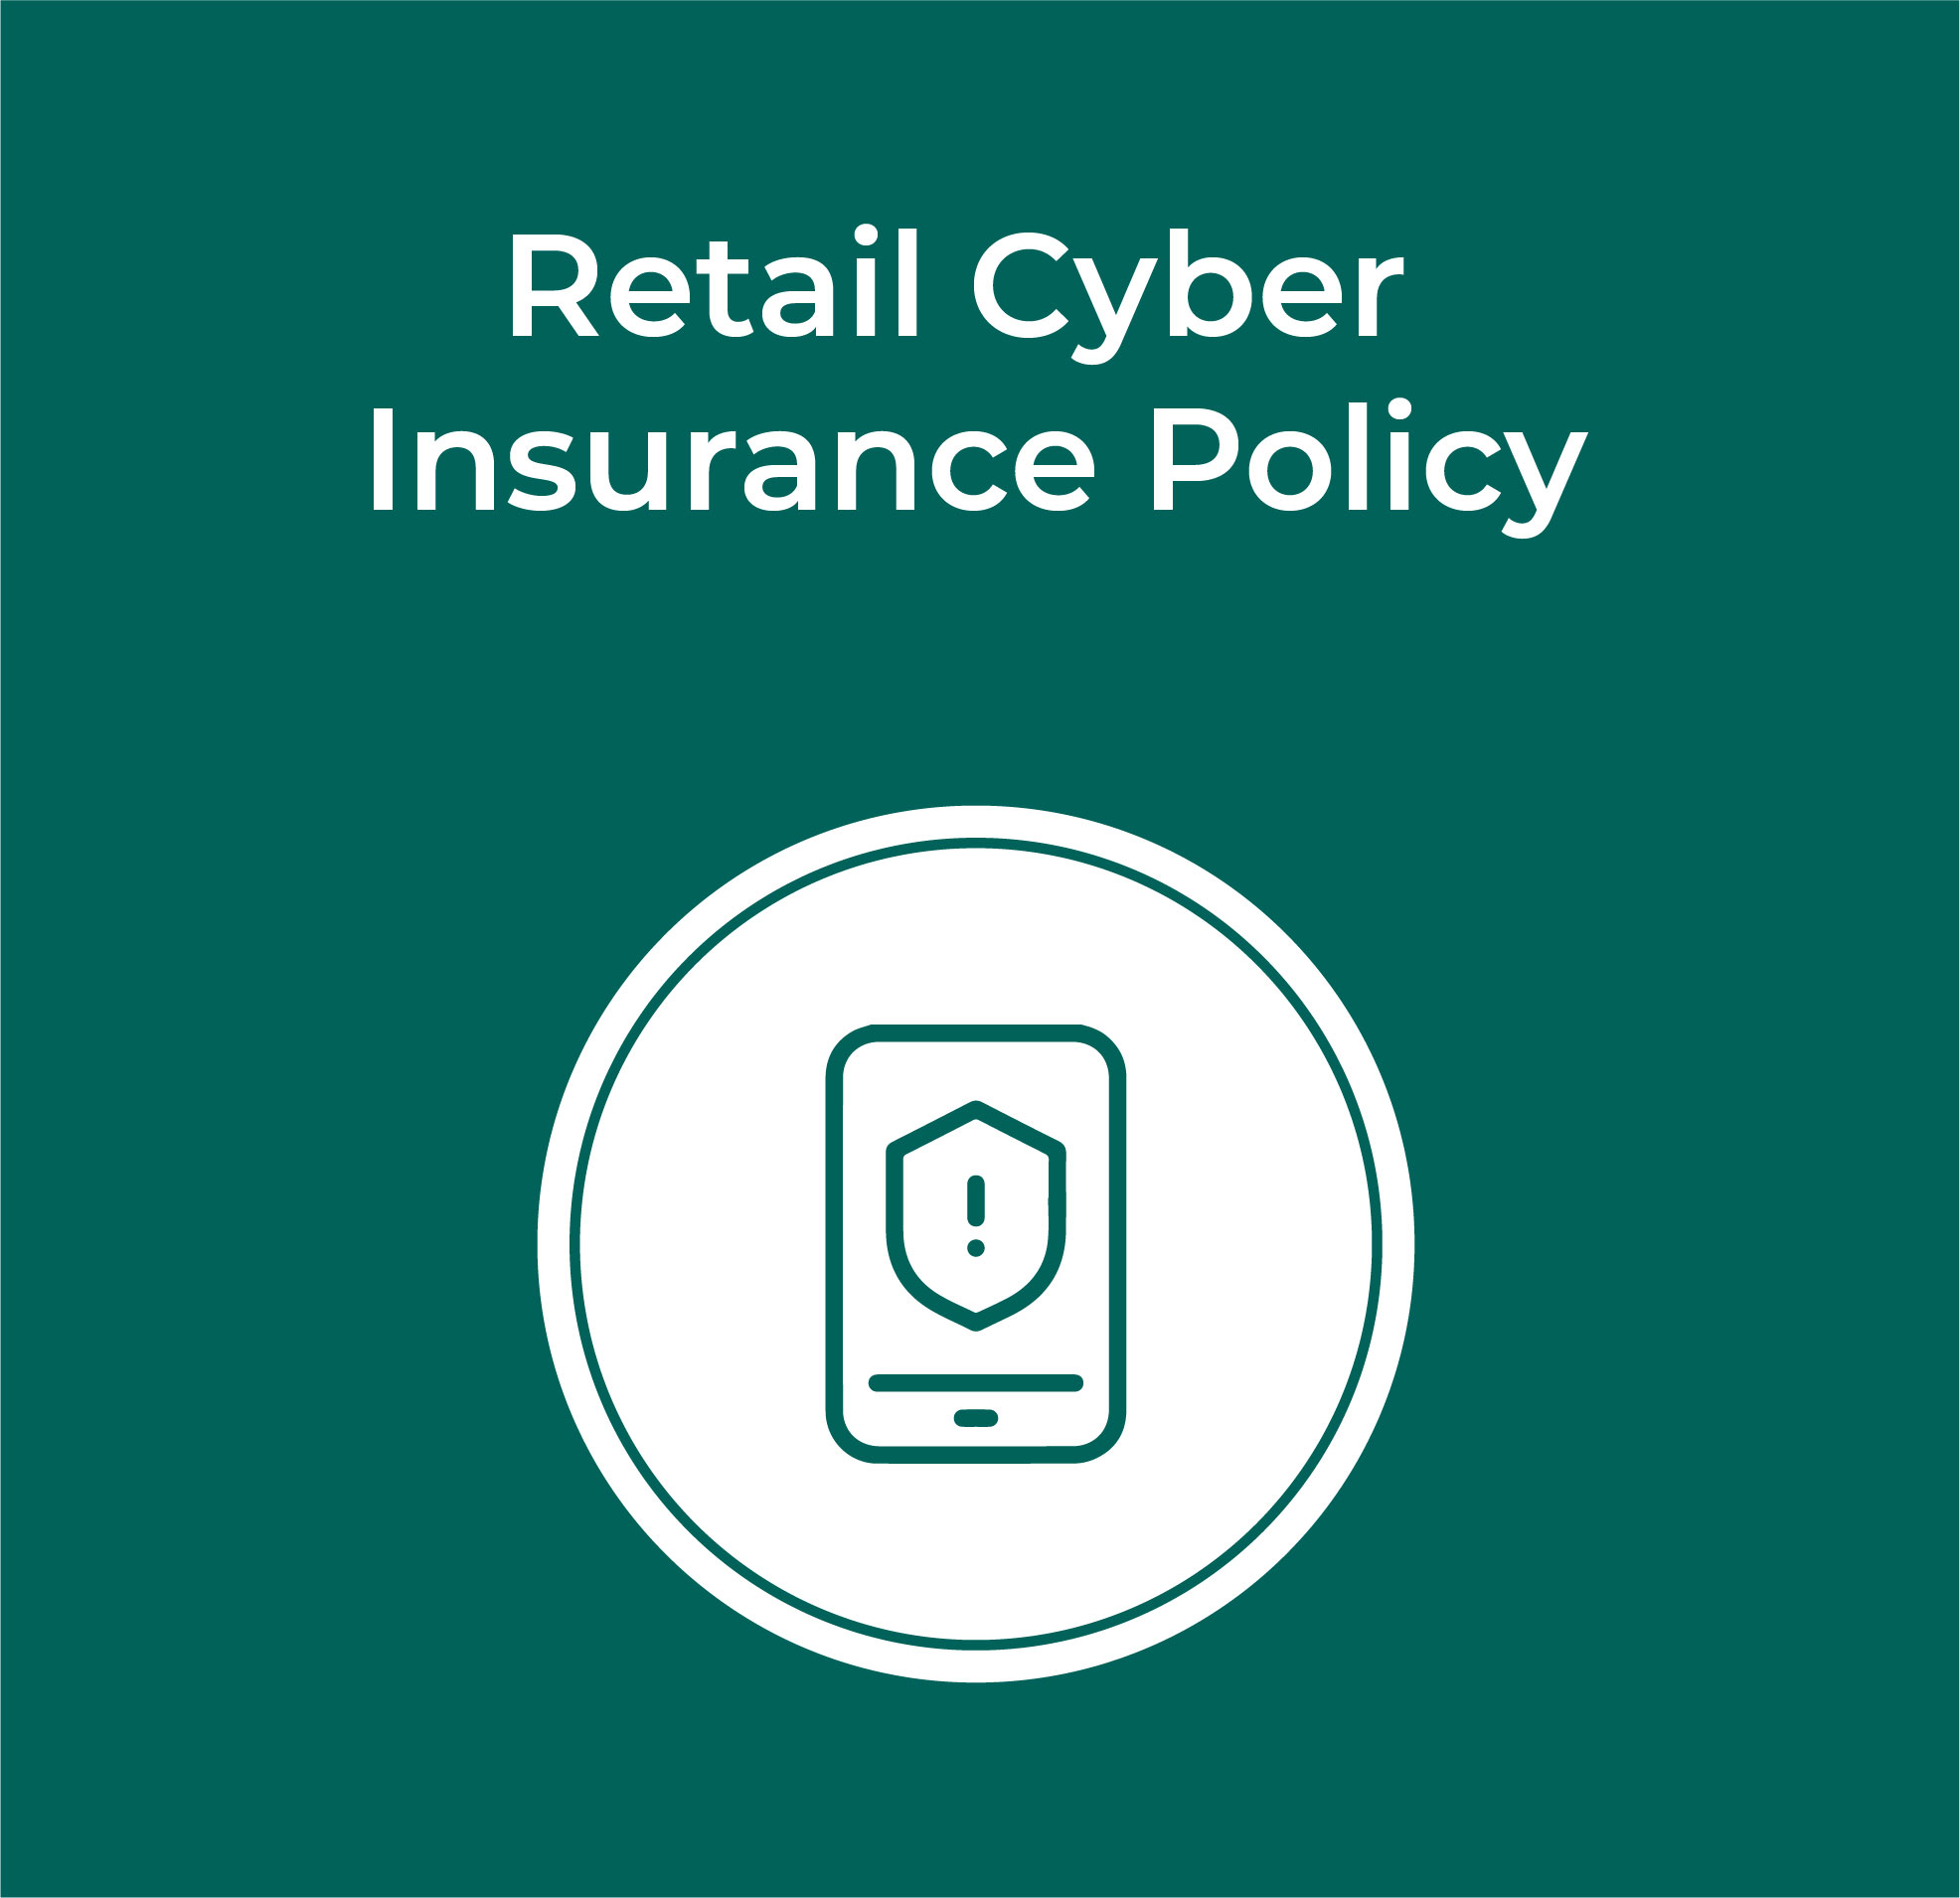 Retail Cyber Insurance Policy